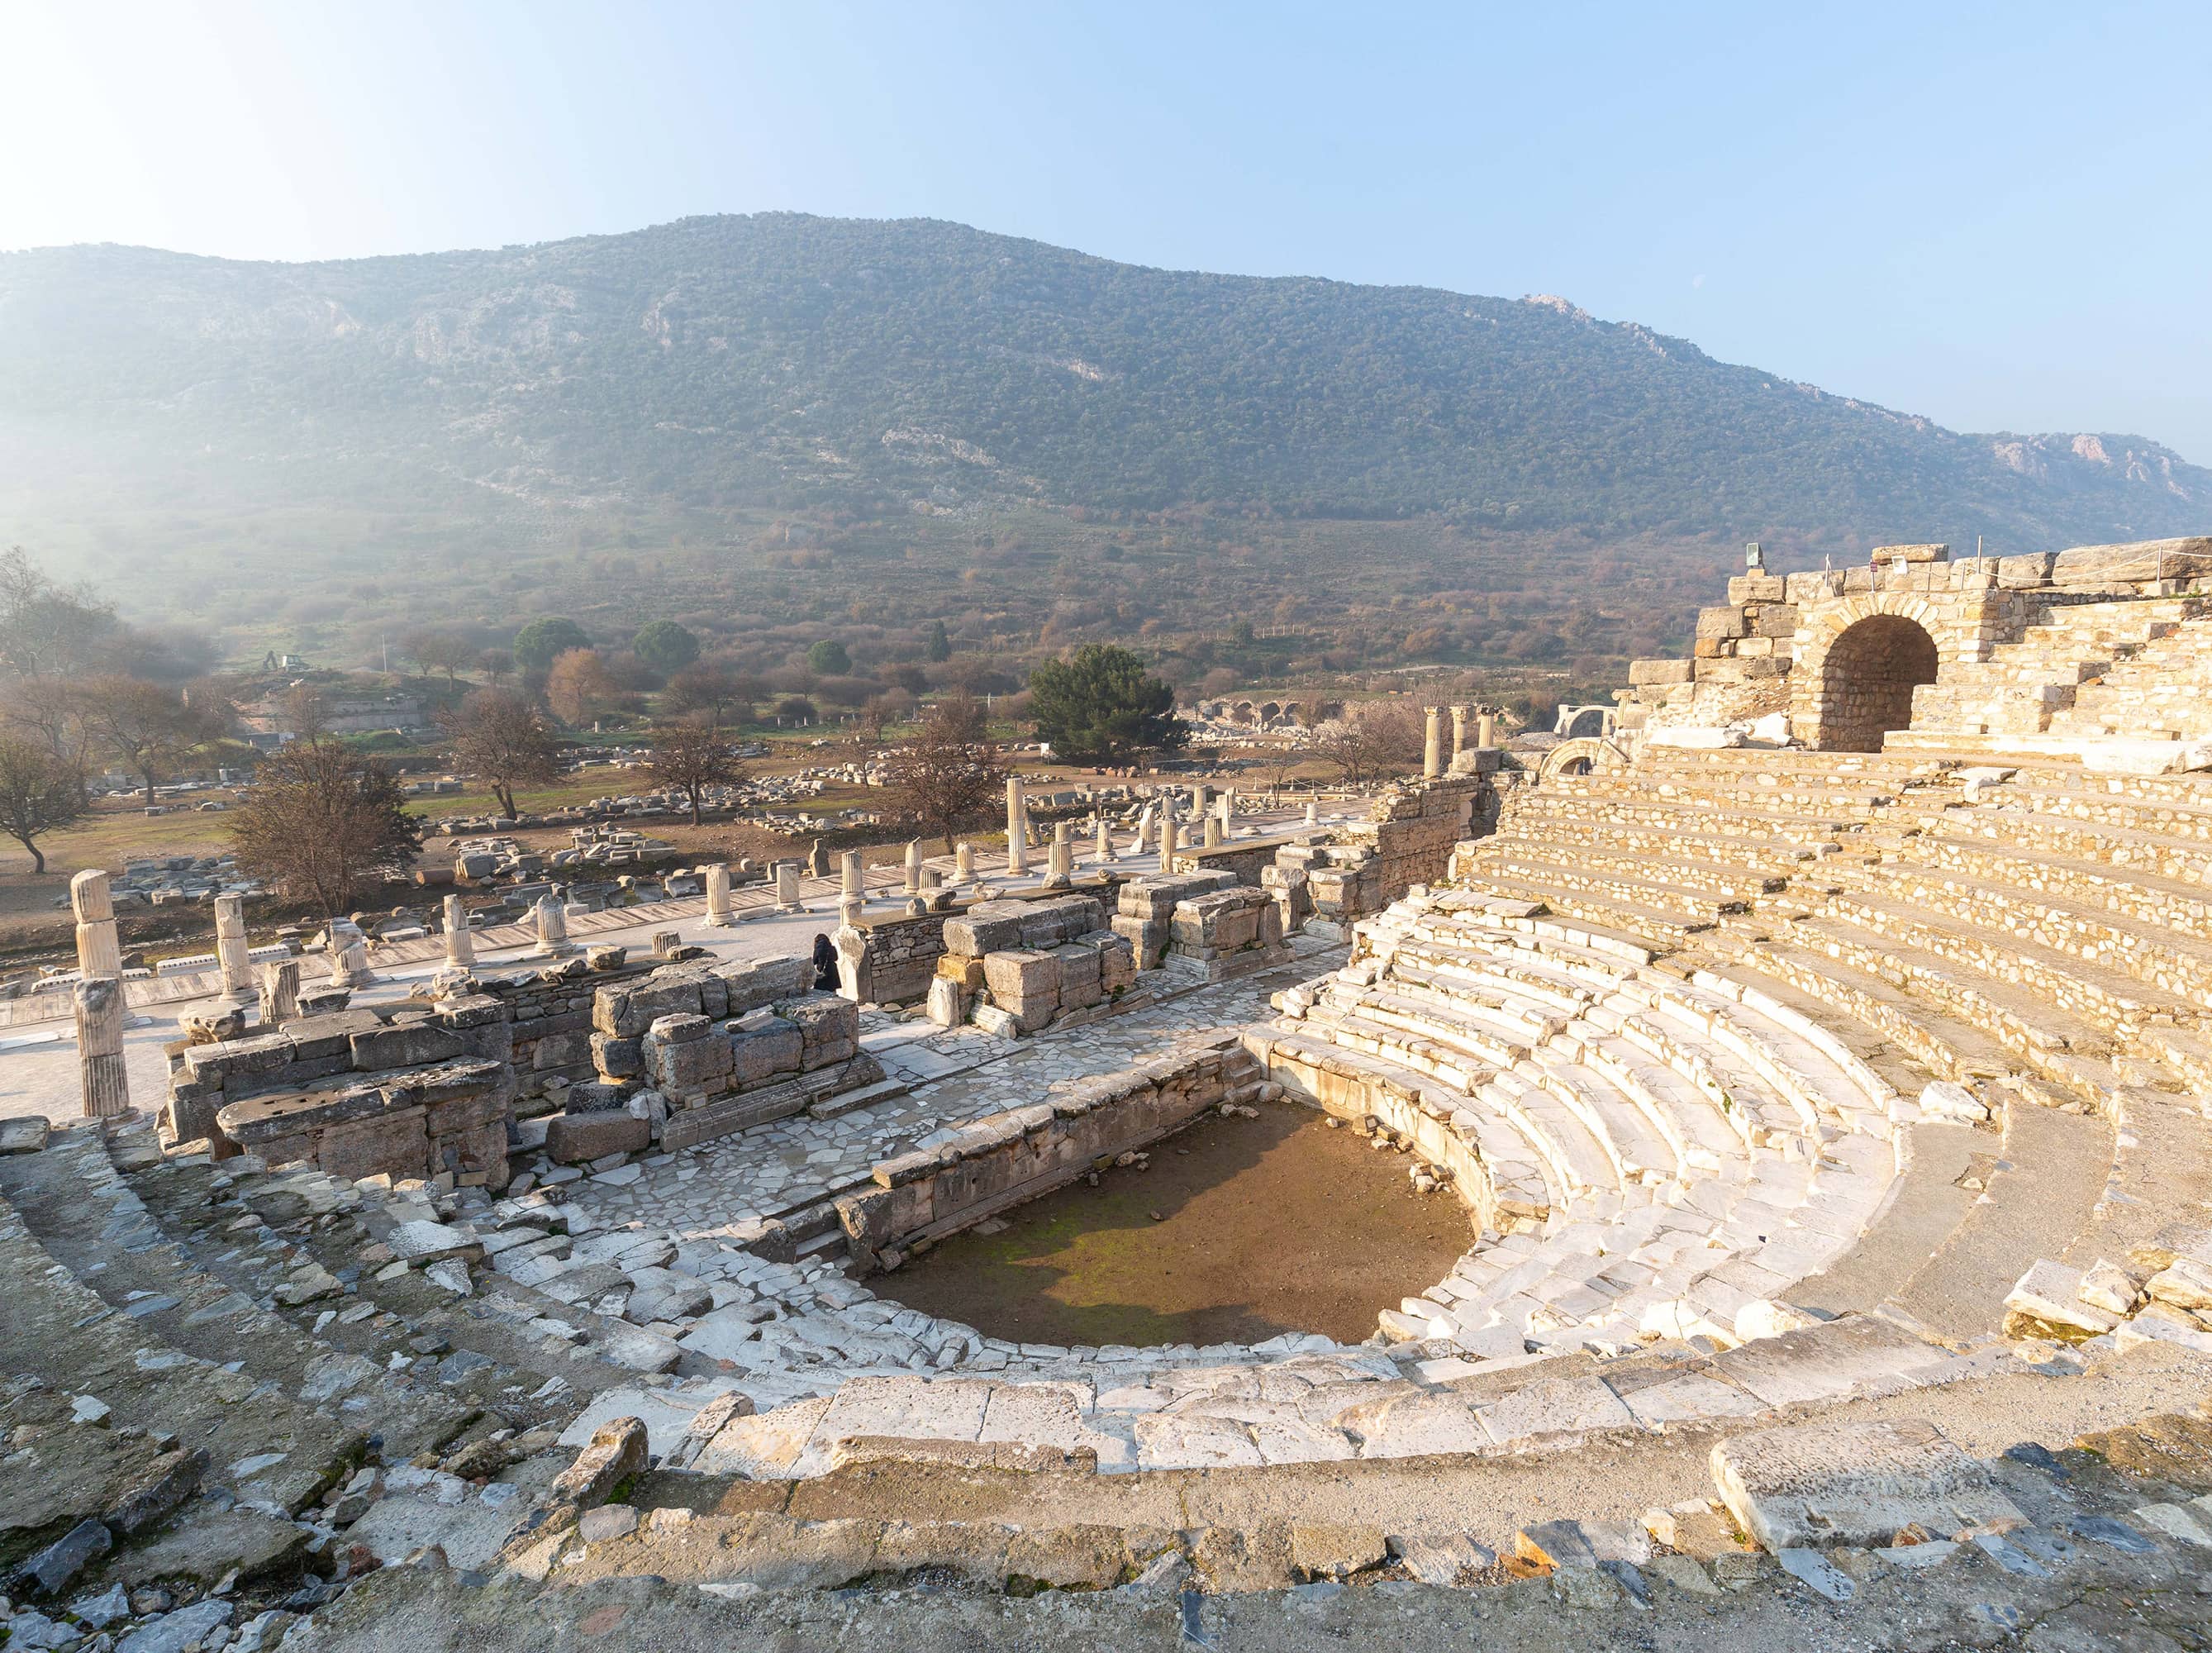  Take a day trip to Ephesus by private jet.  